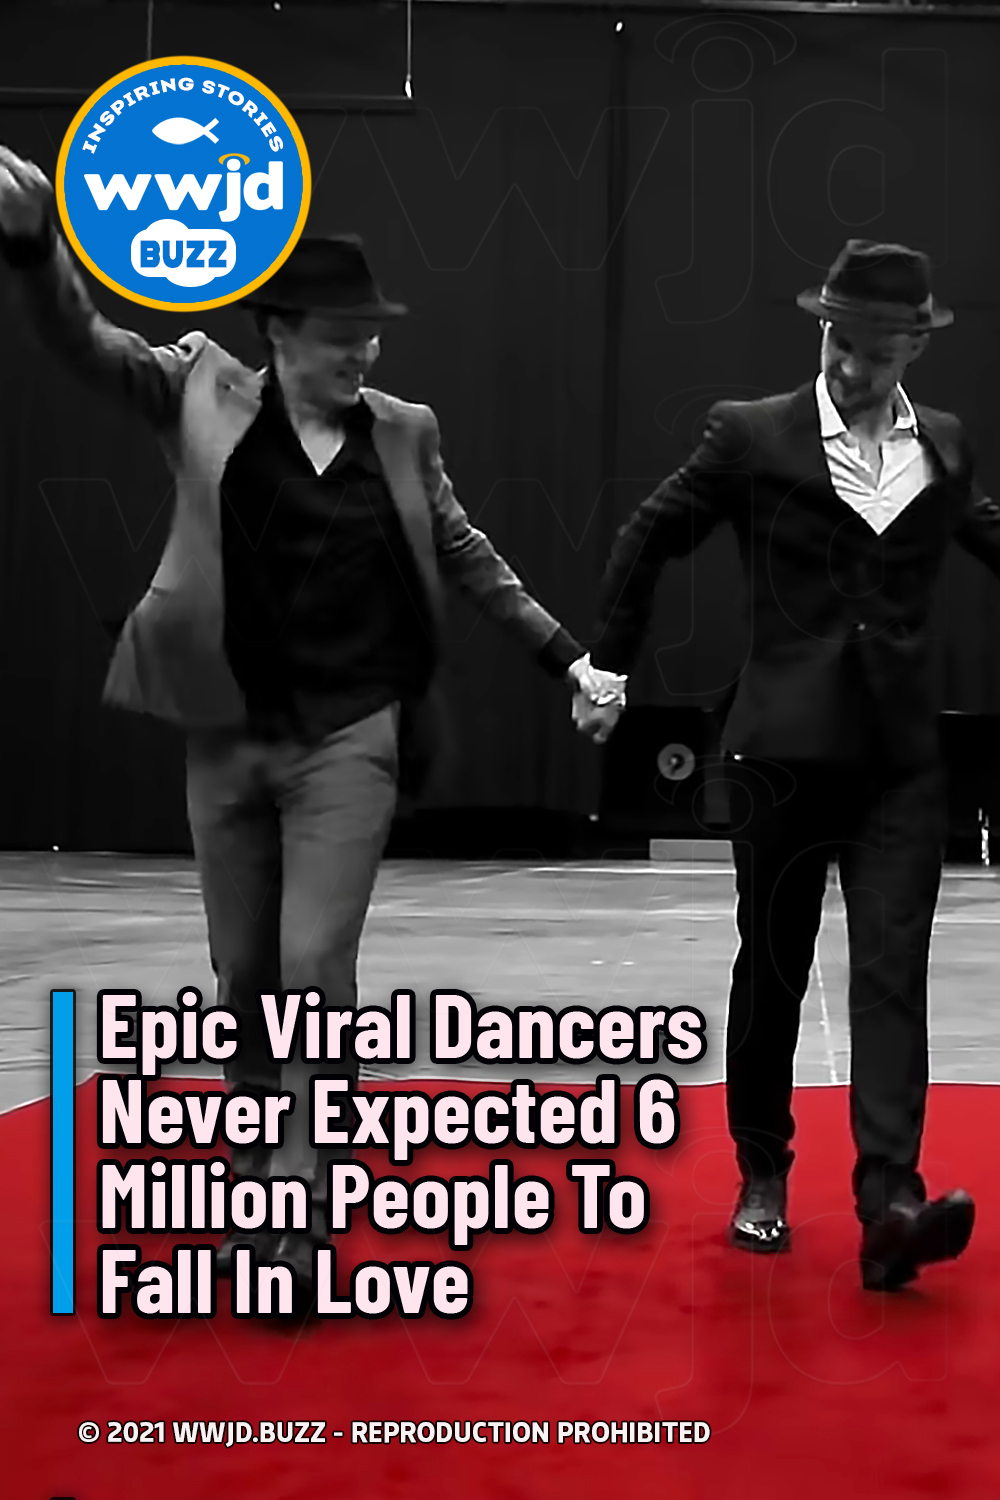 Epic Viral Dancers Never Expected 6 Million People To Fall In Love